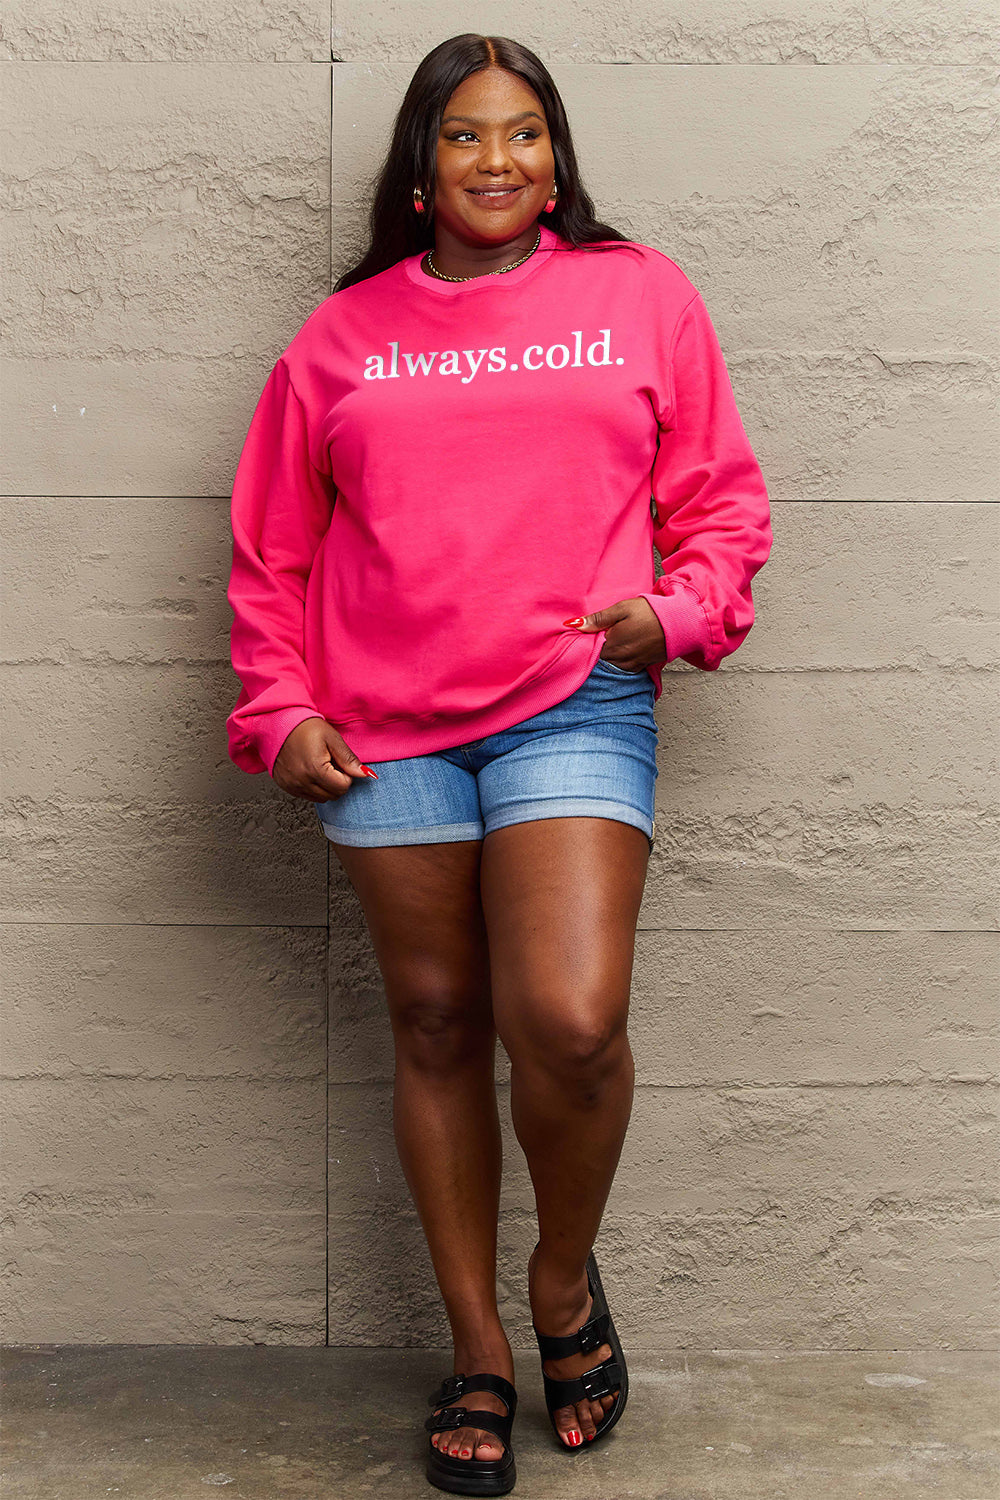 Simply Love Full Size ALWAYS.COLD. Graphic Sweatshirt Trendsi